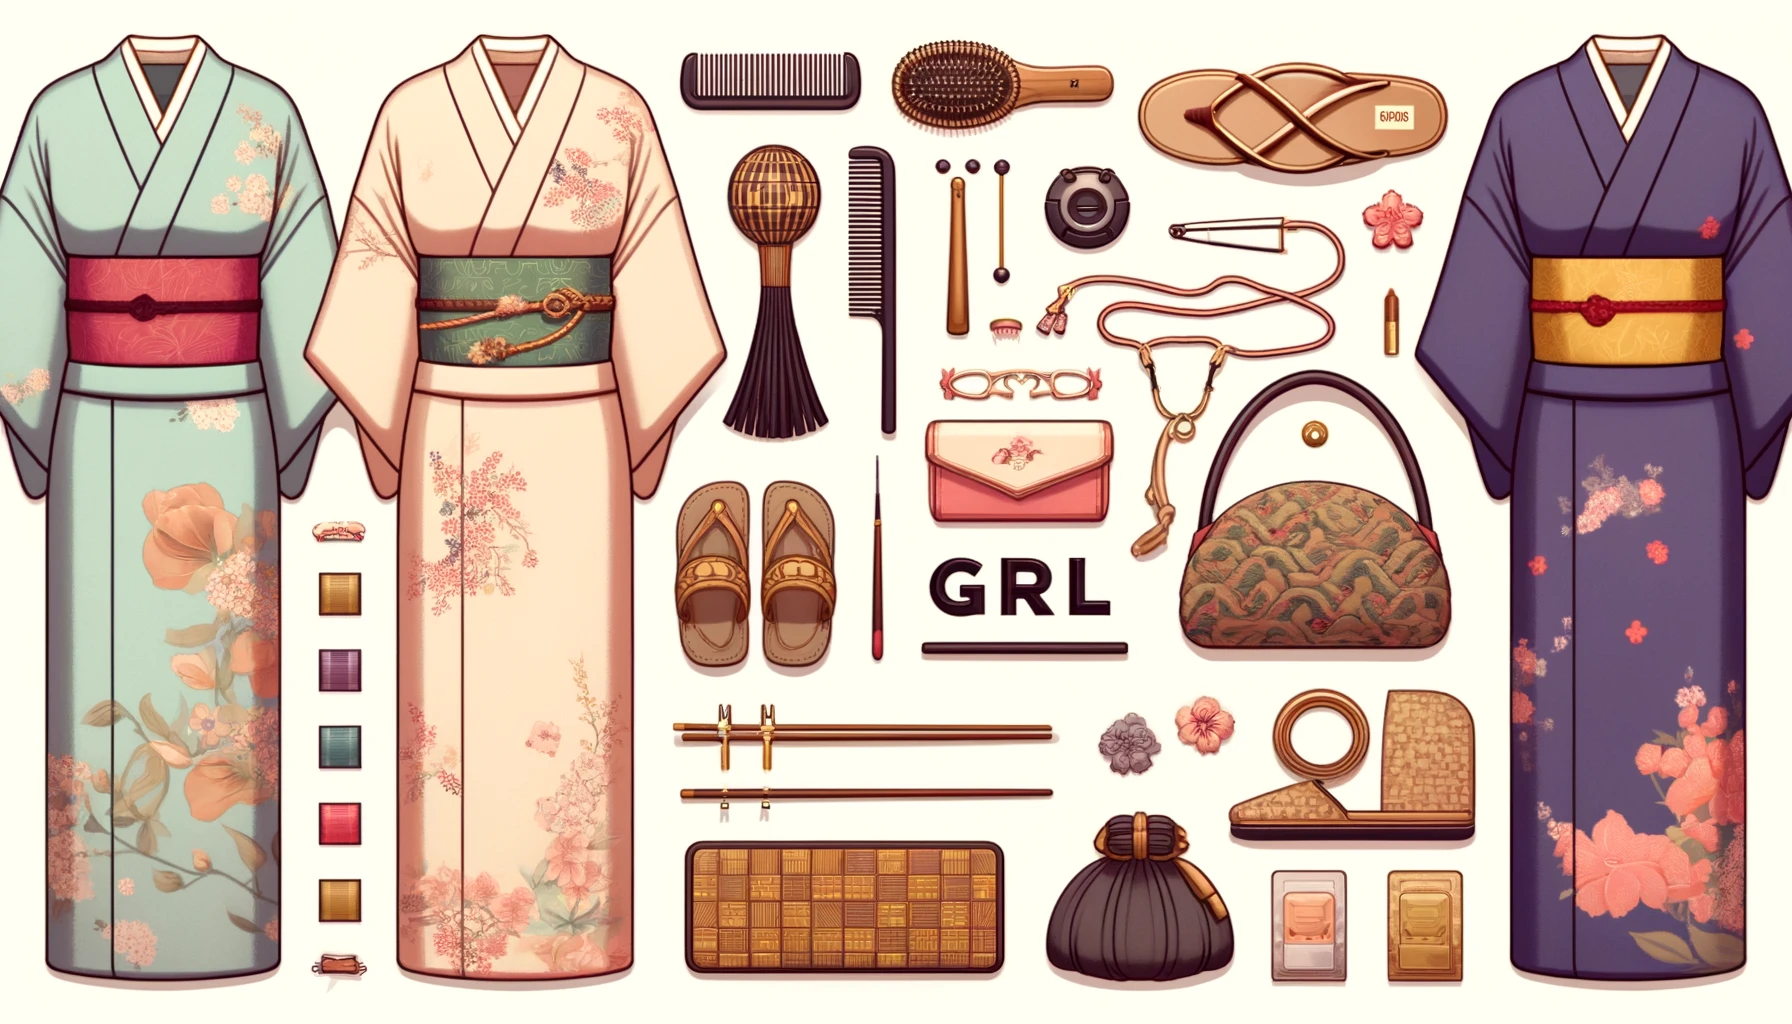 An image showcasing accessories and small items that complement GRL yukatas. The image includes items like hairpins, bags, sandals, and other traditional accessories arranged aesthetically. The background features these items alongside GRL yukatas, with 'GRL' prominently displayed.